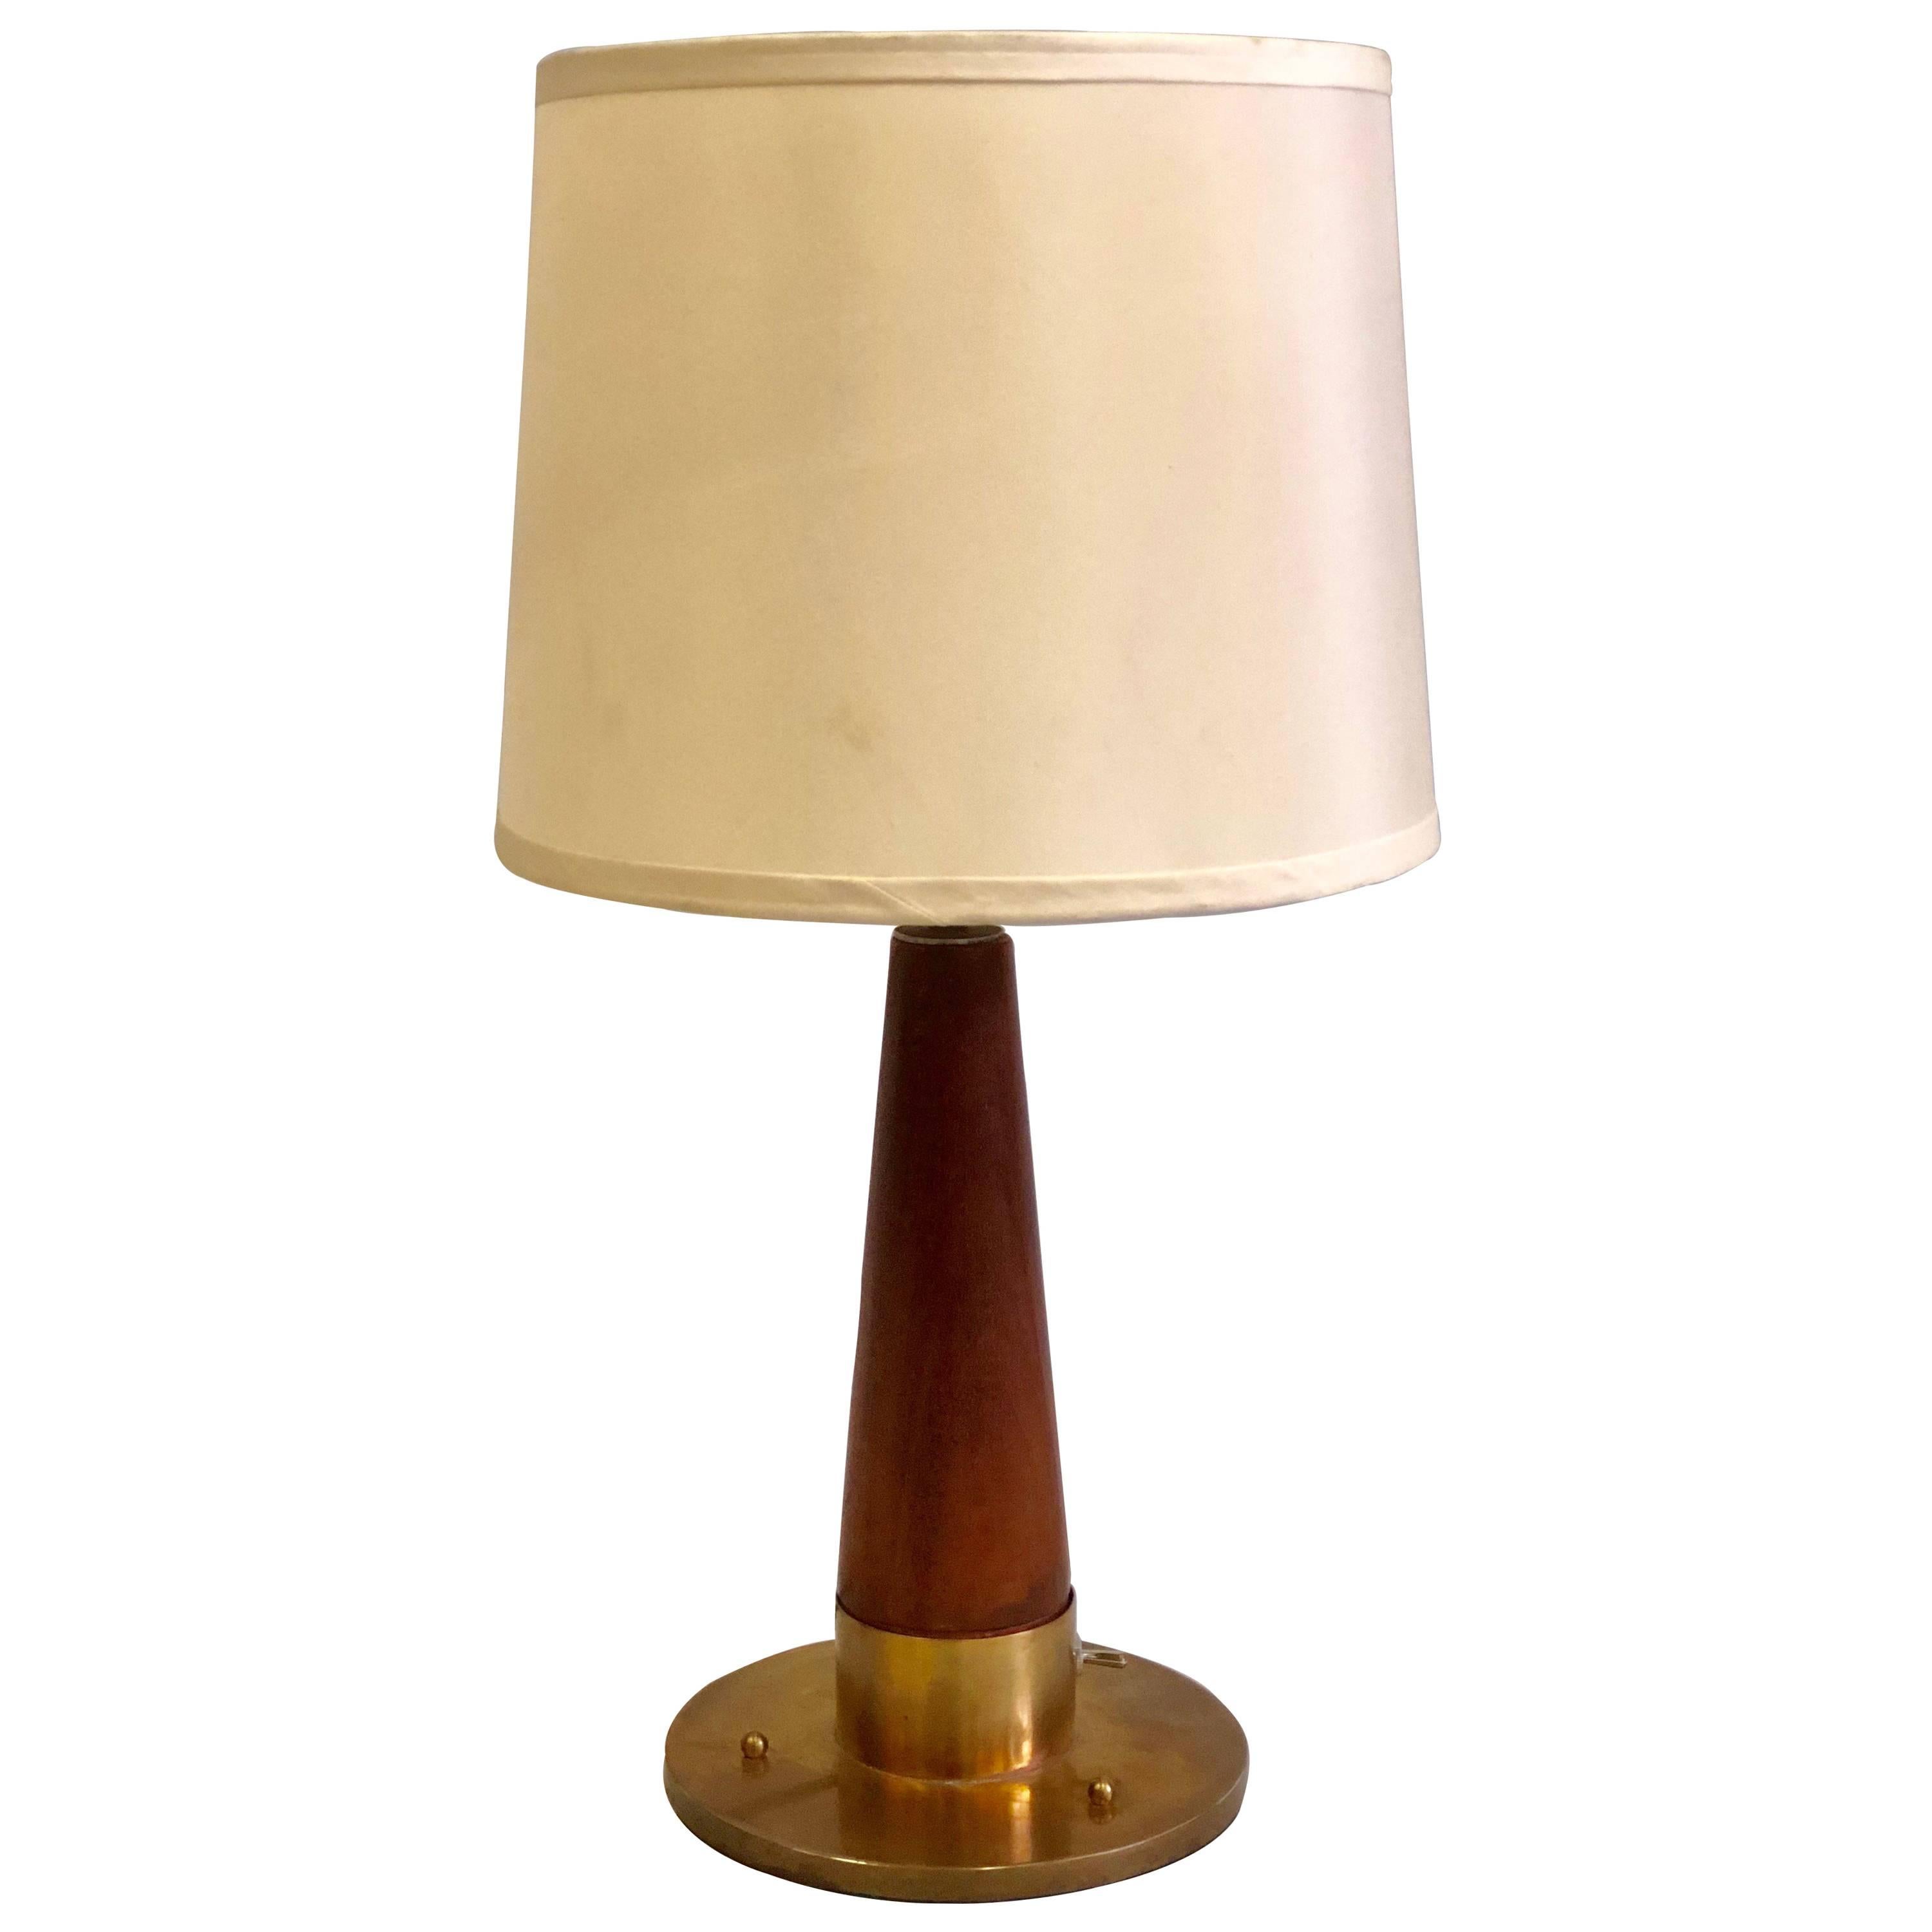 British Mid-Century Modern Teak and Brass, Marine Desk or Table Lamp, 1930 For Sale